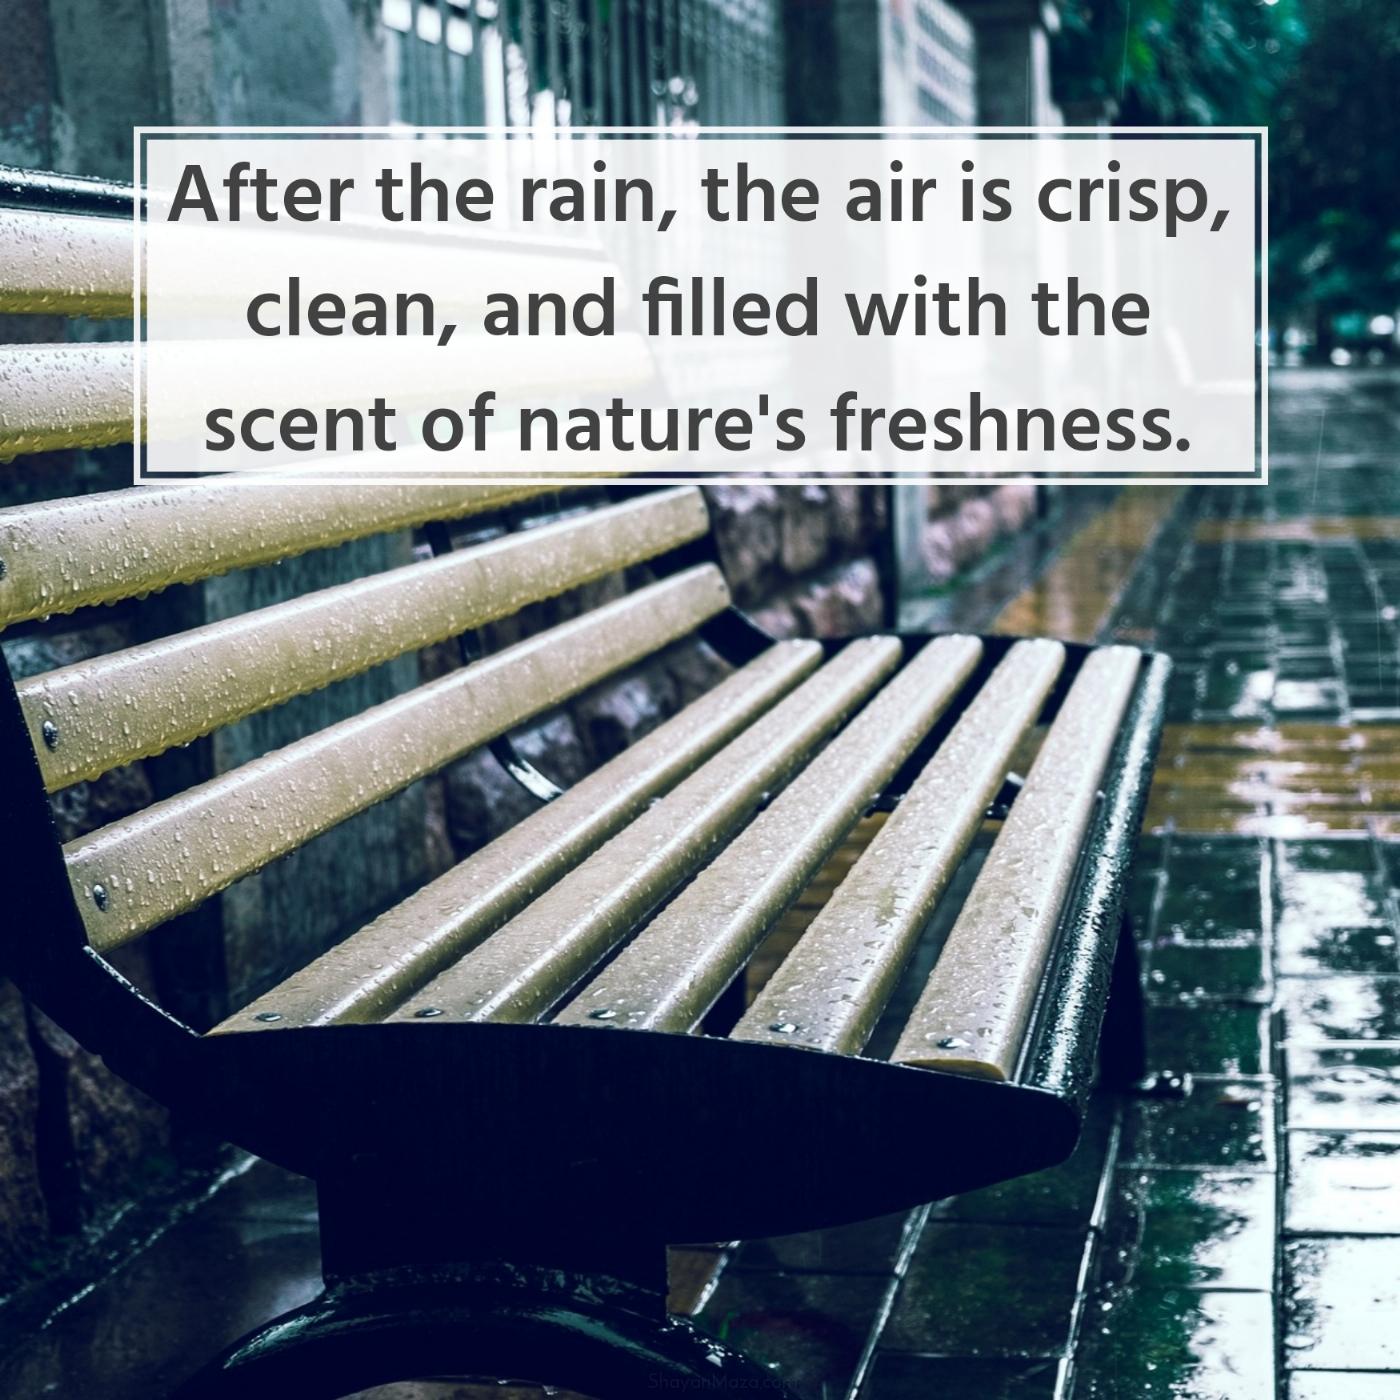 After the rain the air is crisp clean and filled with the scent